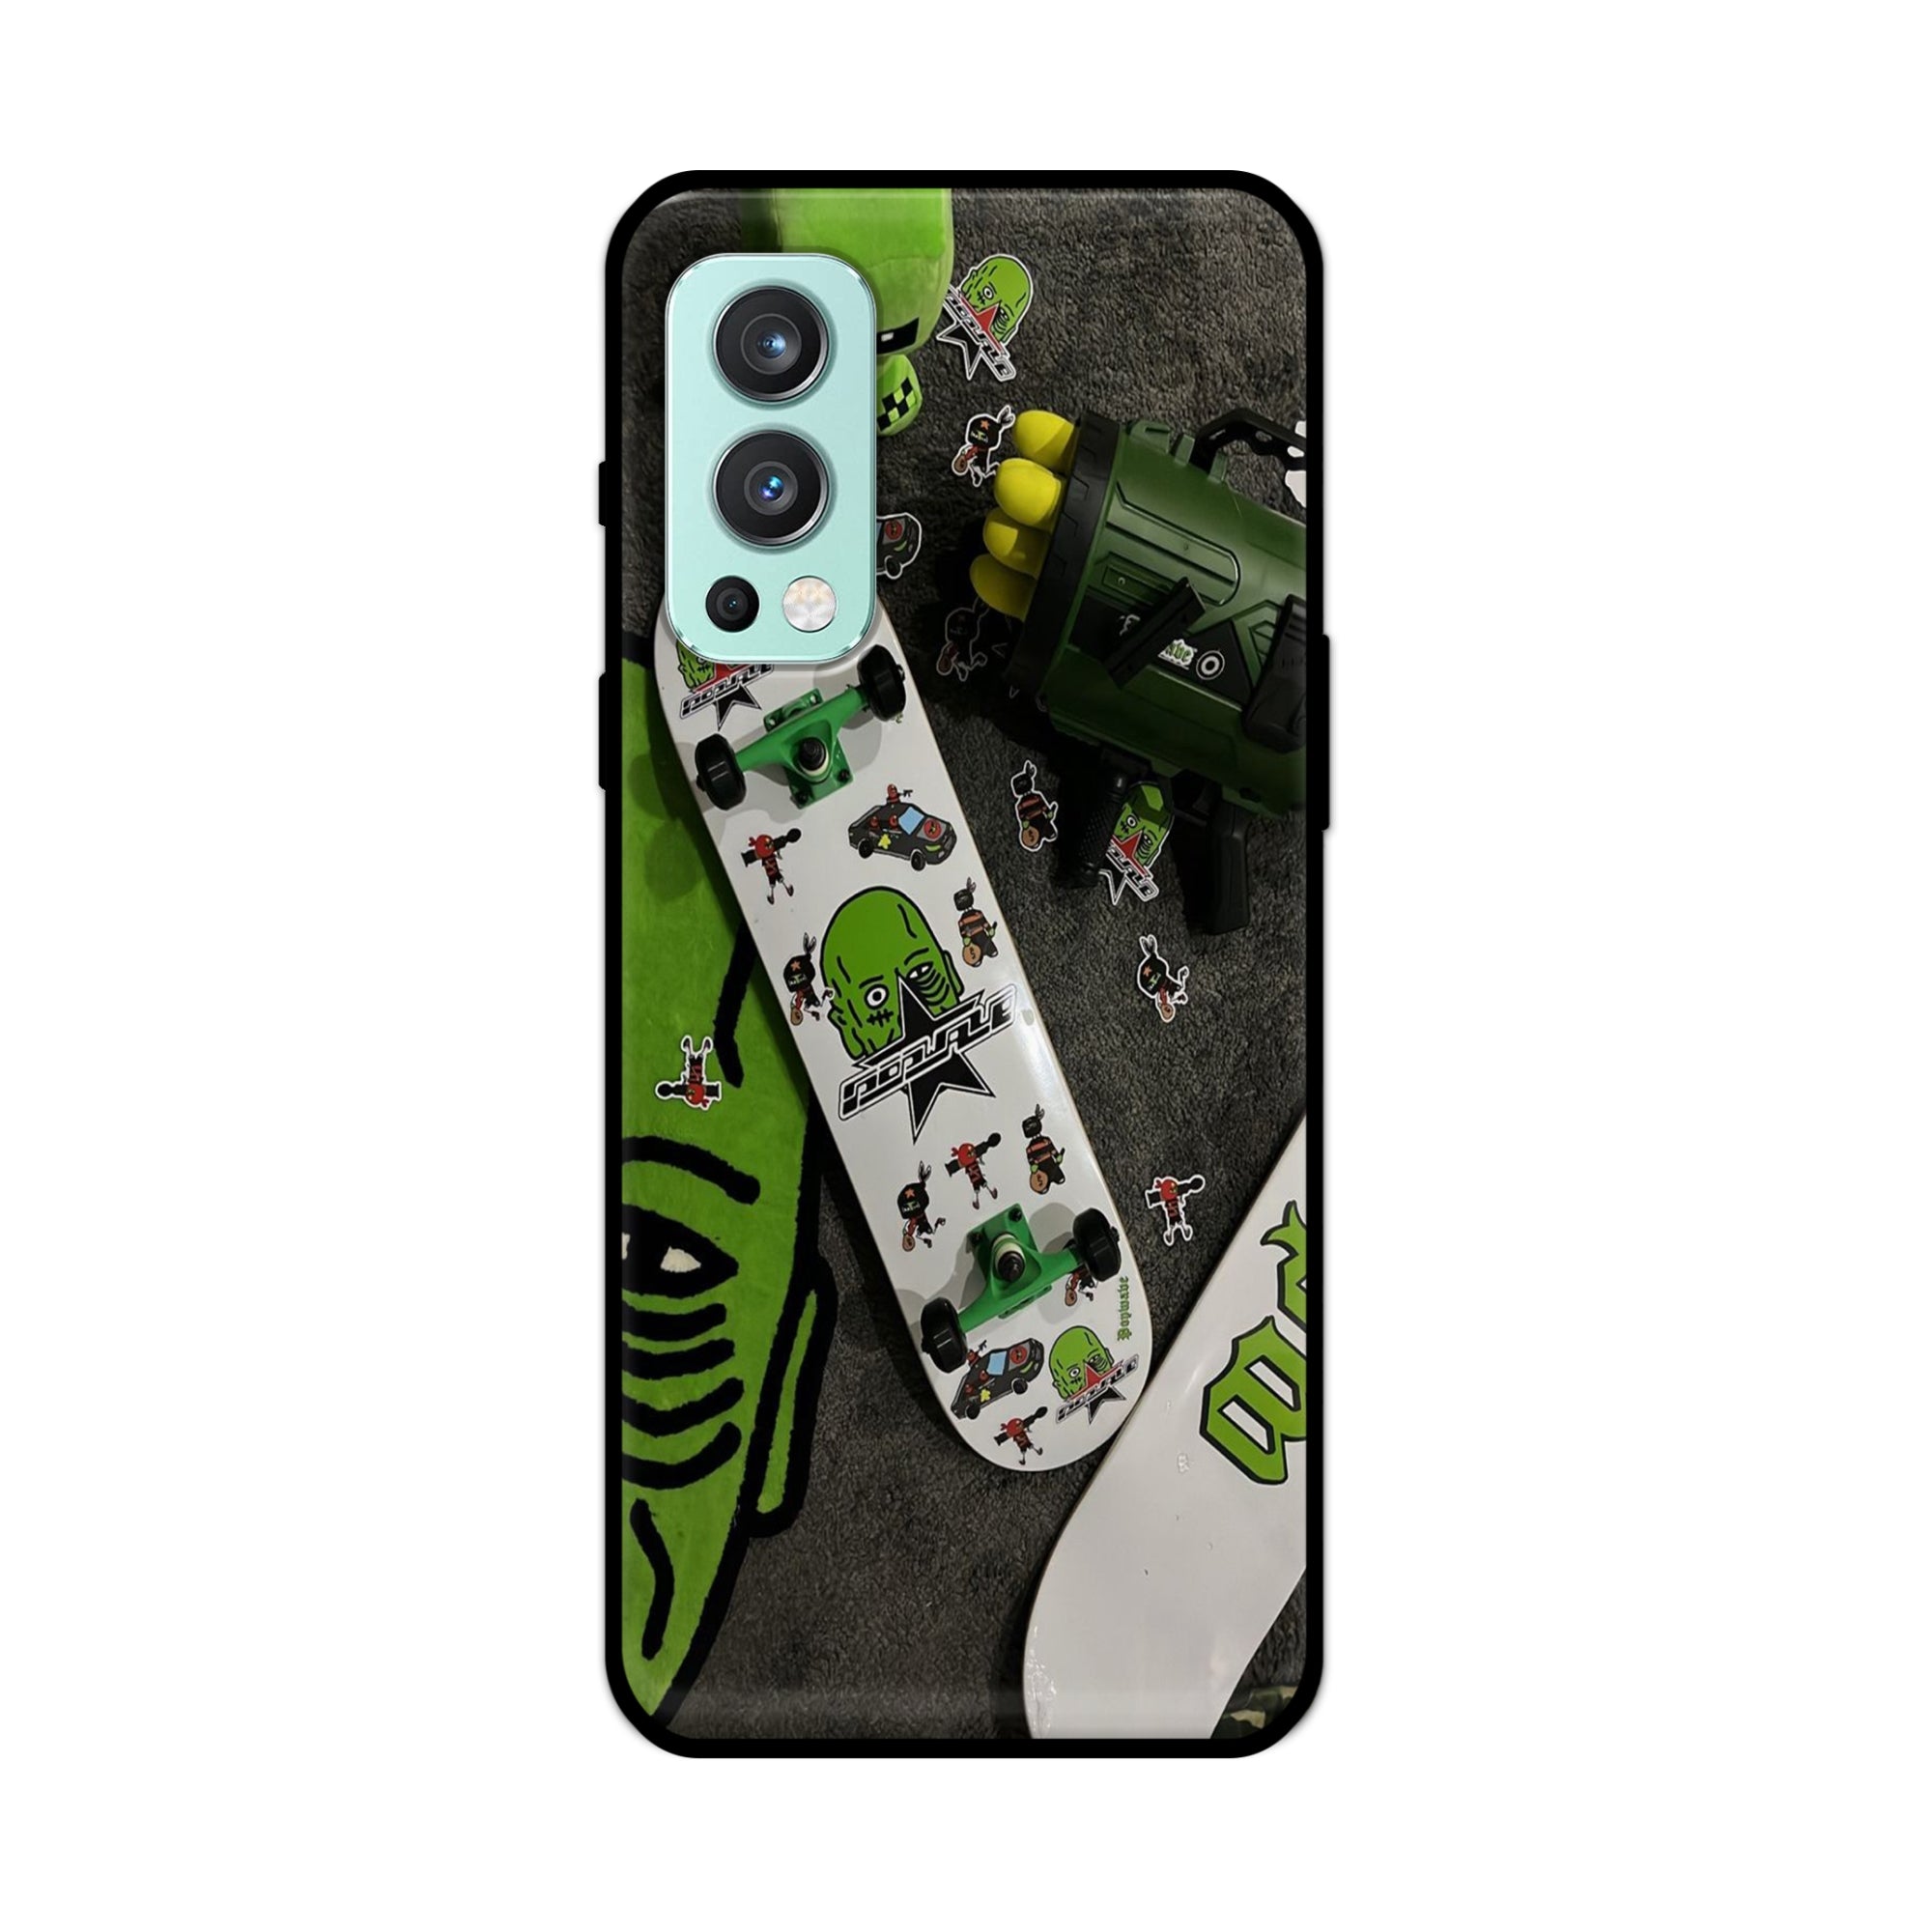 Buy Hulk Skateboard Metal-Silicon Back Mobile Phone Case/Cover For OnePlus Nord 2 5G Online